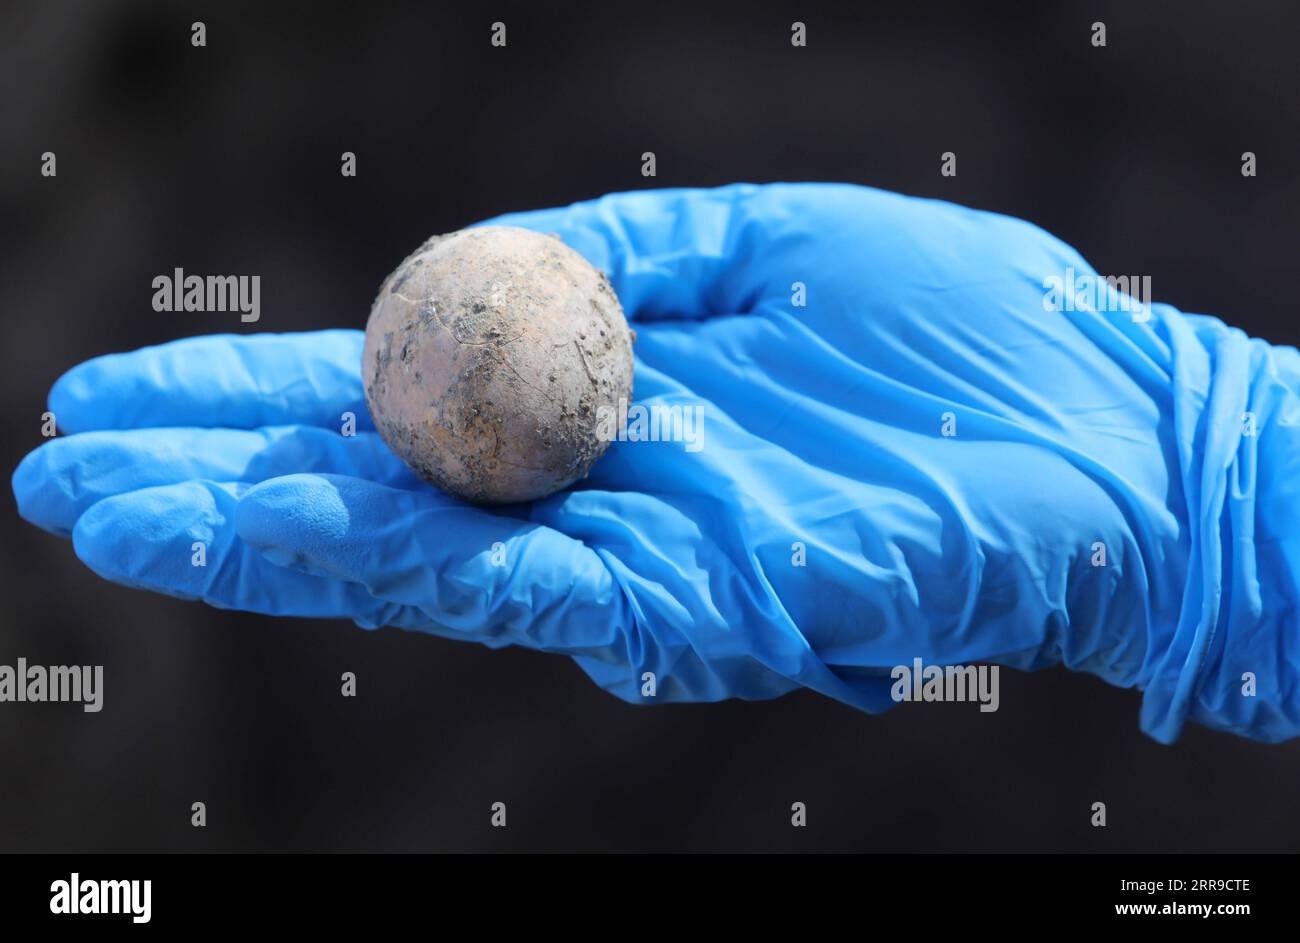 210609 -- YAVNE ISRAEL, June 9, 2021 -- An Israeli archeologist shows an intact chicken s egg of roughly 1,000 years ago in Yavne, central Israel, on June 9, 2021. Israeli archeologists have discovered an intact chicken s egg of roughly 1,000 years ago, the Israel Antiquities Authority IAA said Wednesday. The egg was found in an excavation site in Yavne, in a cesspit dating from the Islamic period. Photo by /Xinhua ISRAEL-YAVNE-ARCHEOLOGY-EGG GilxCohenxMagen PUBLICATIONxNOTxINxCHN Stock Photo